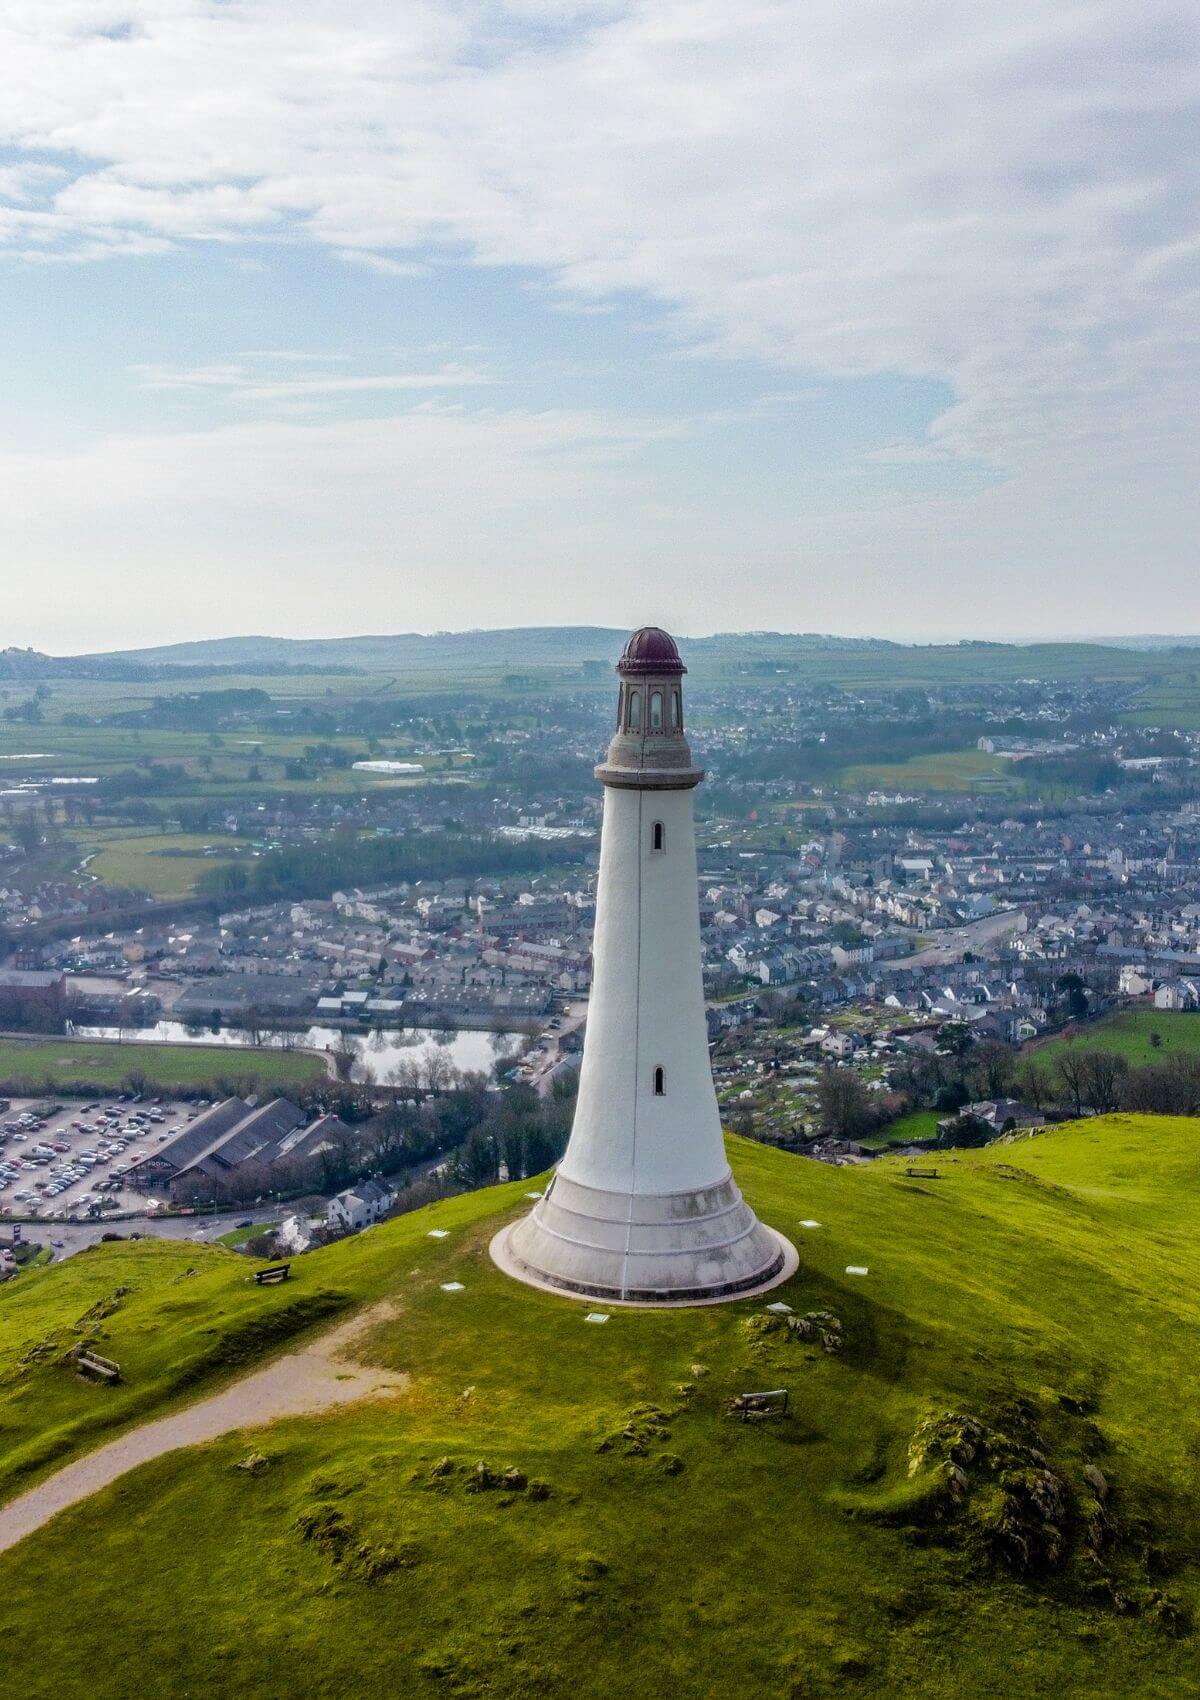 Ulverston is the first stop on our Lake District road trip